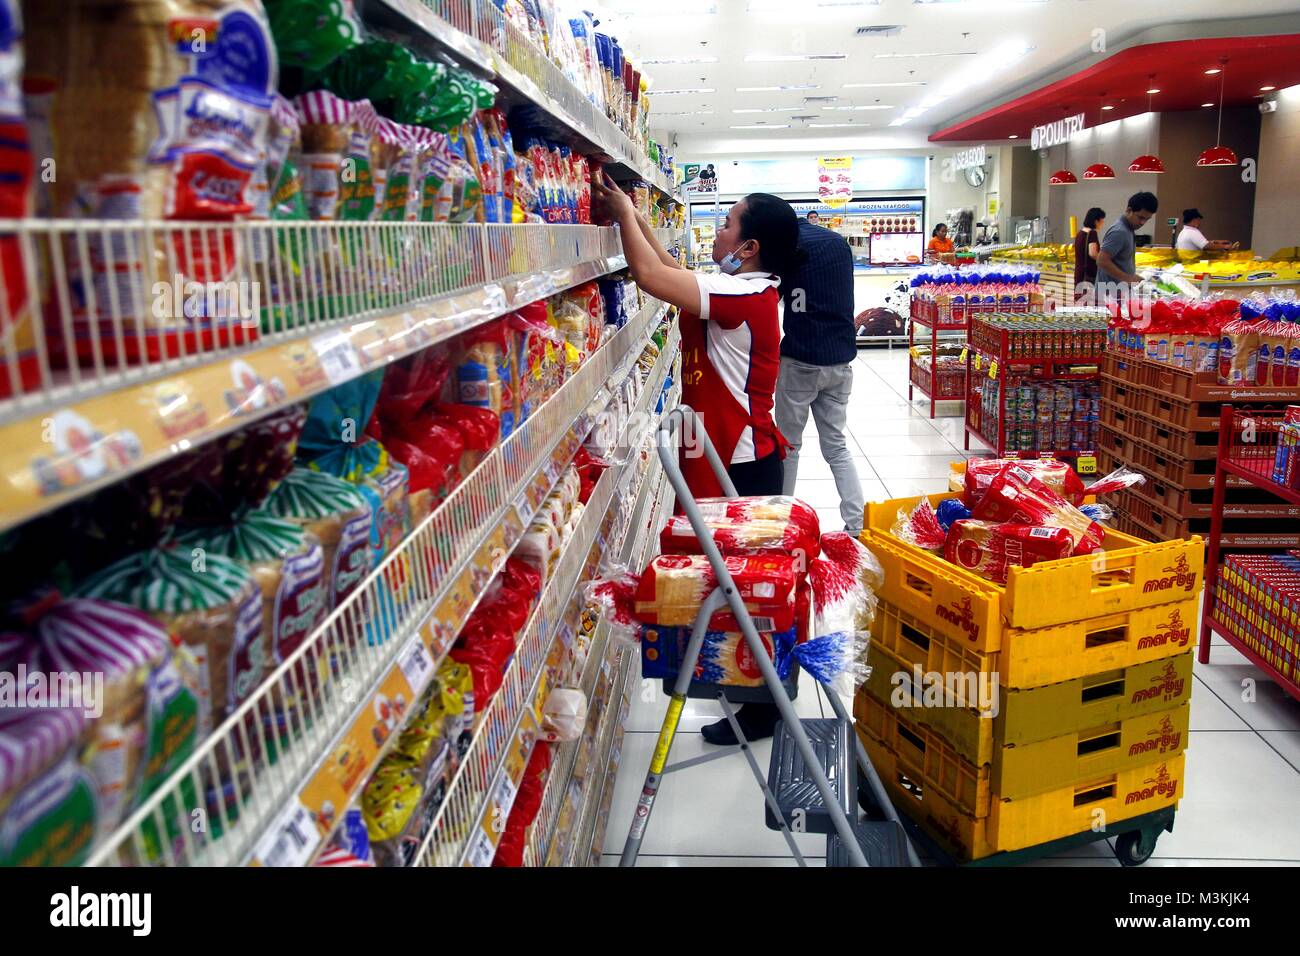 TAYTAY, RIZAL, PHILIPPINES - JANUARY 29, 2018: A worker arranges different kinds of bread on a display rack inside a grocery store. Stock Photo